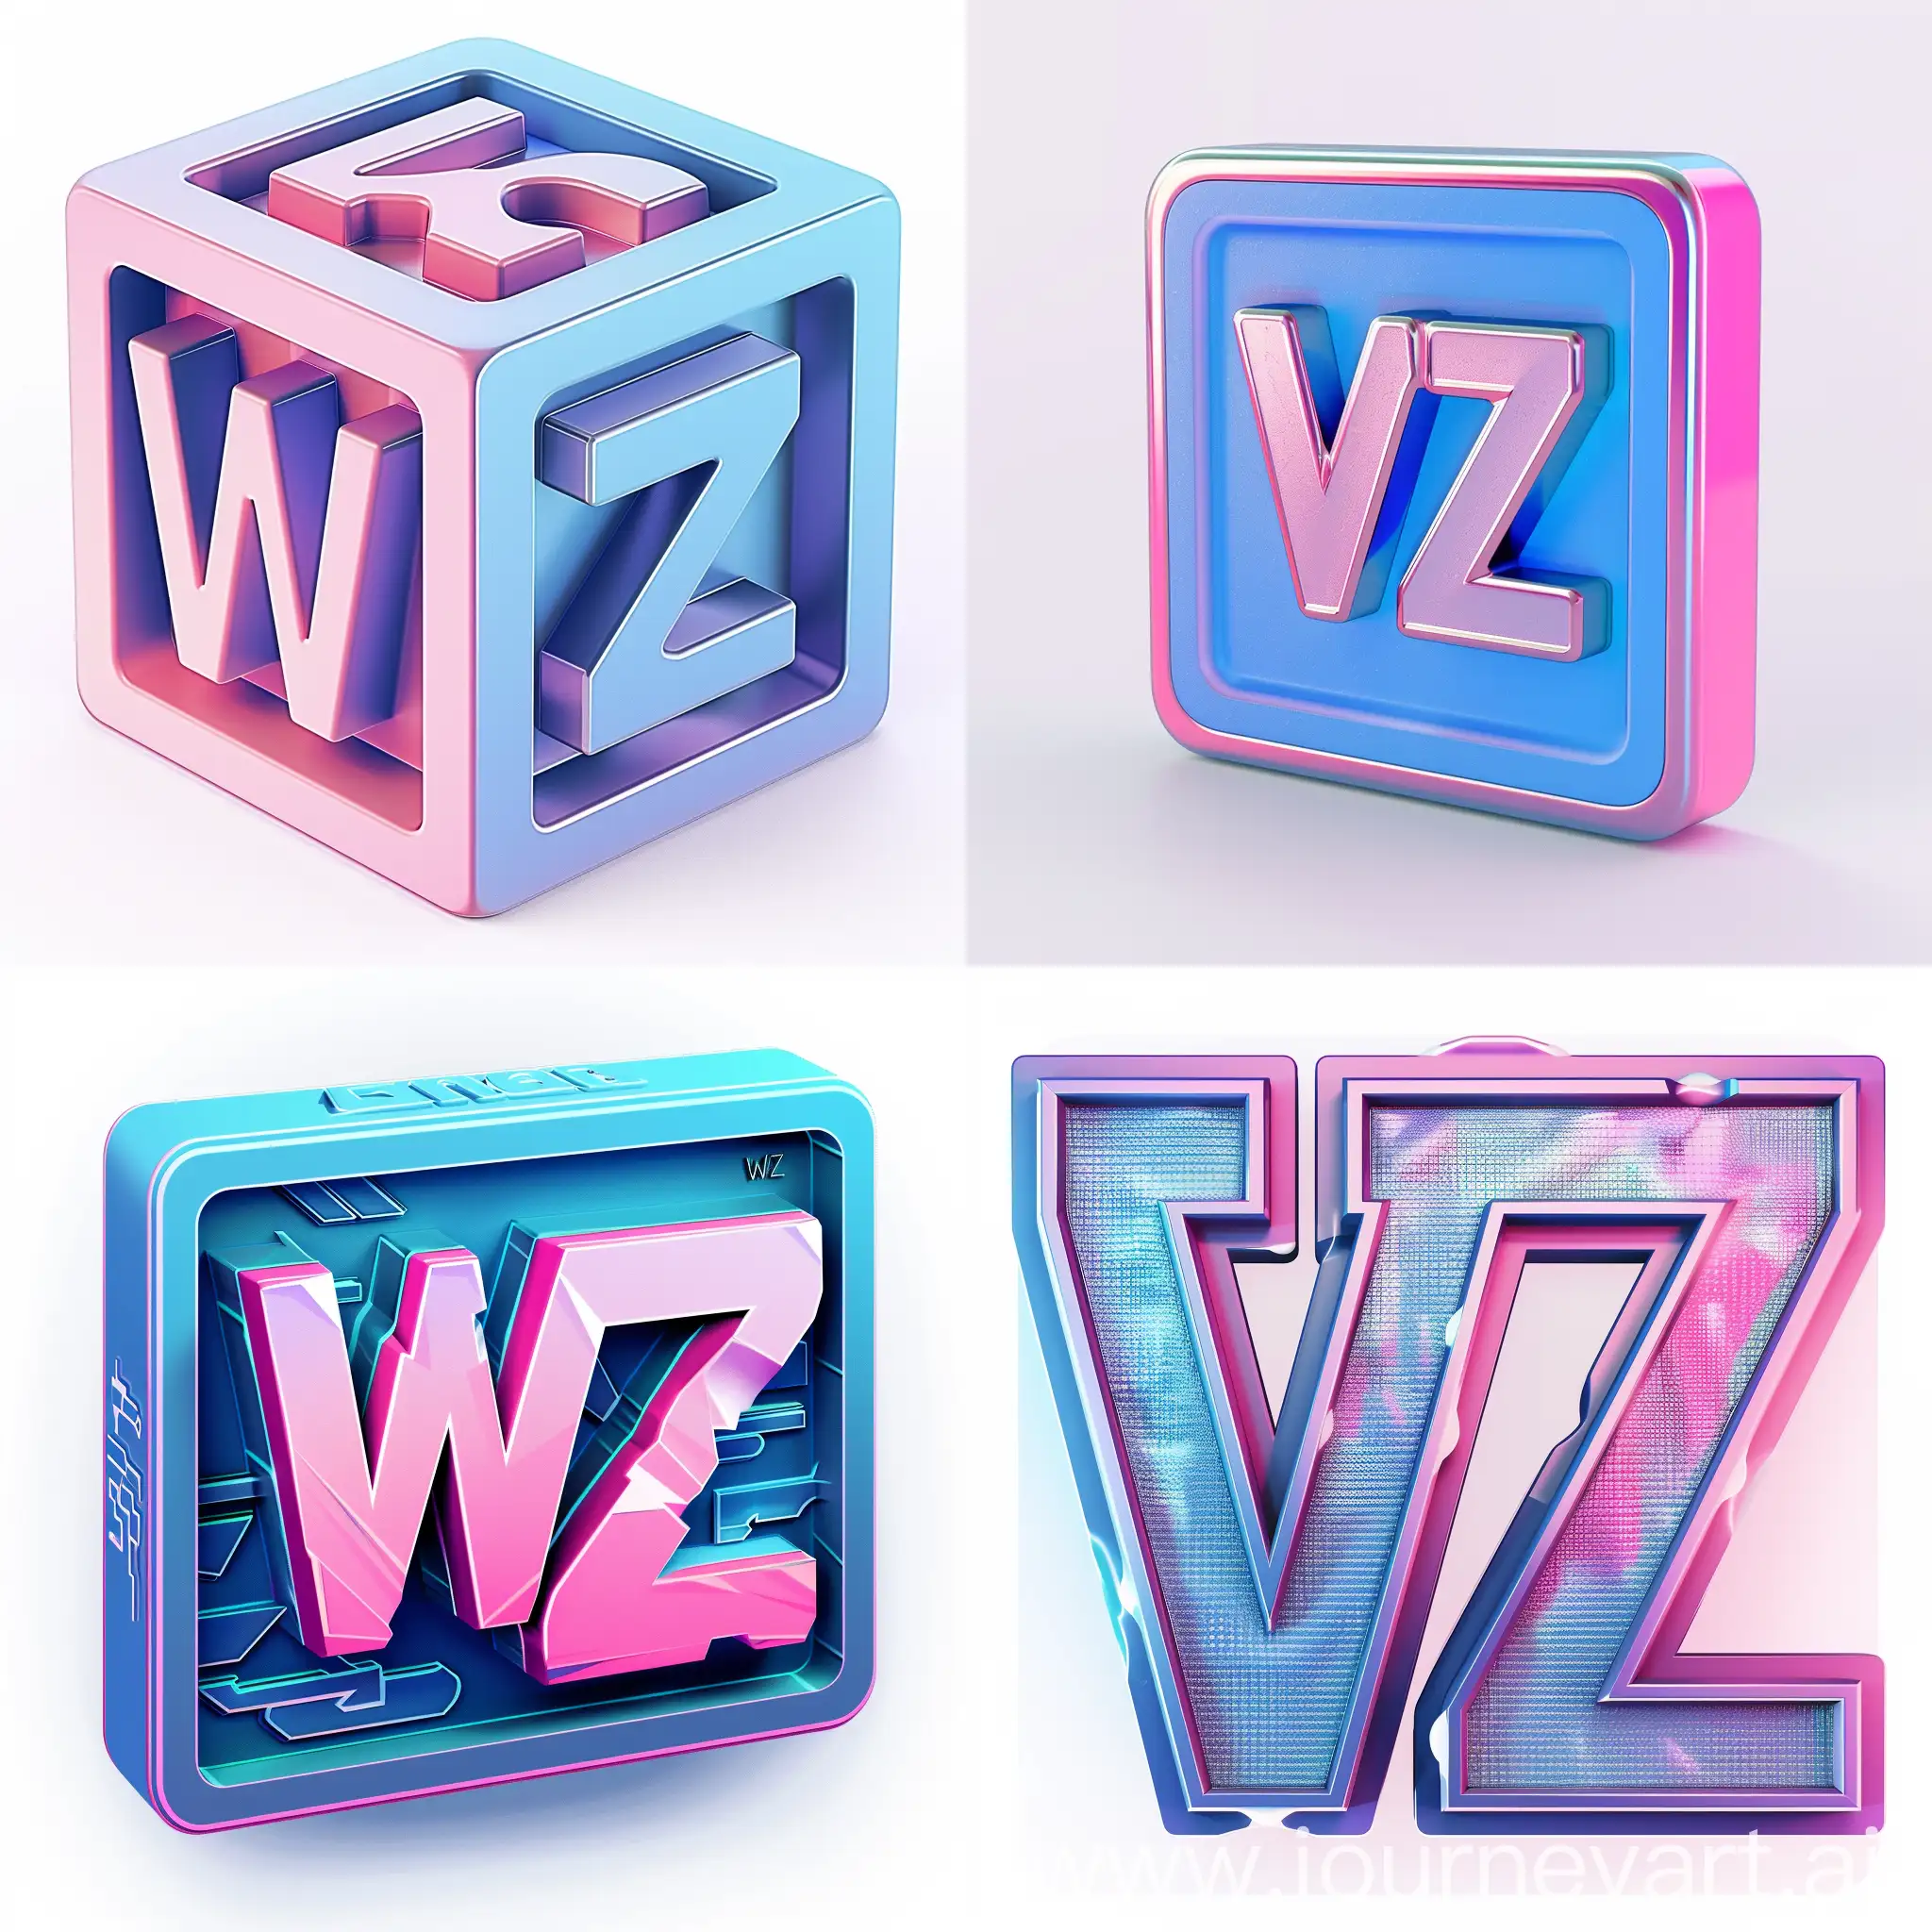 discord shop server icon with letters "WZ in blue-pink colors